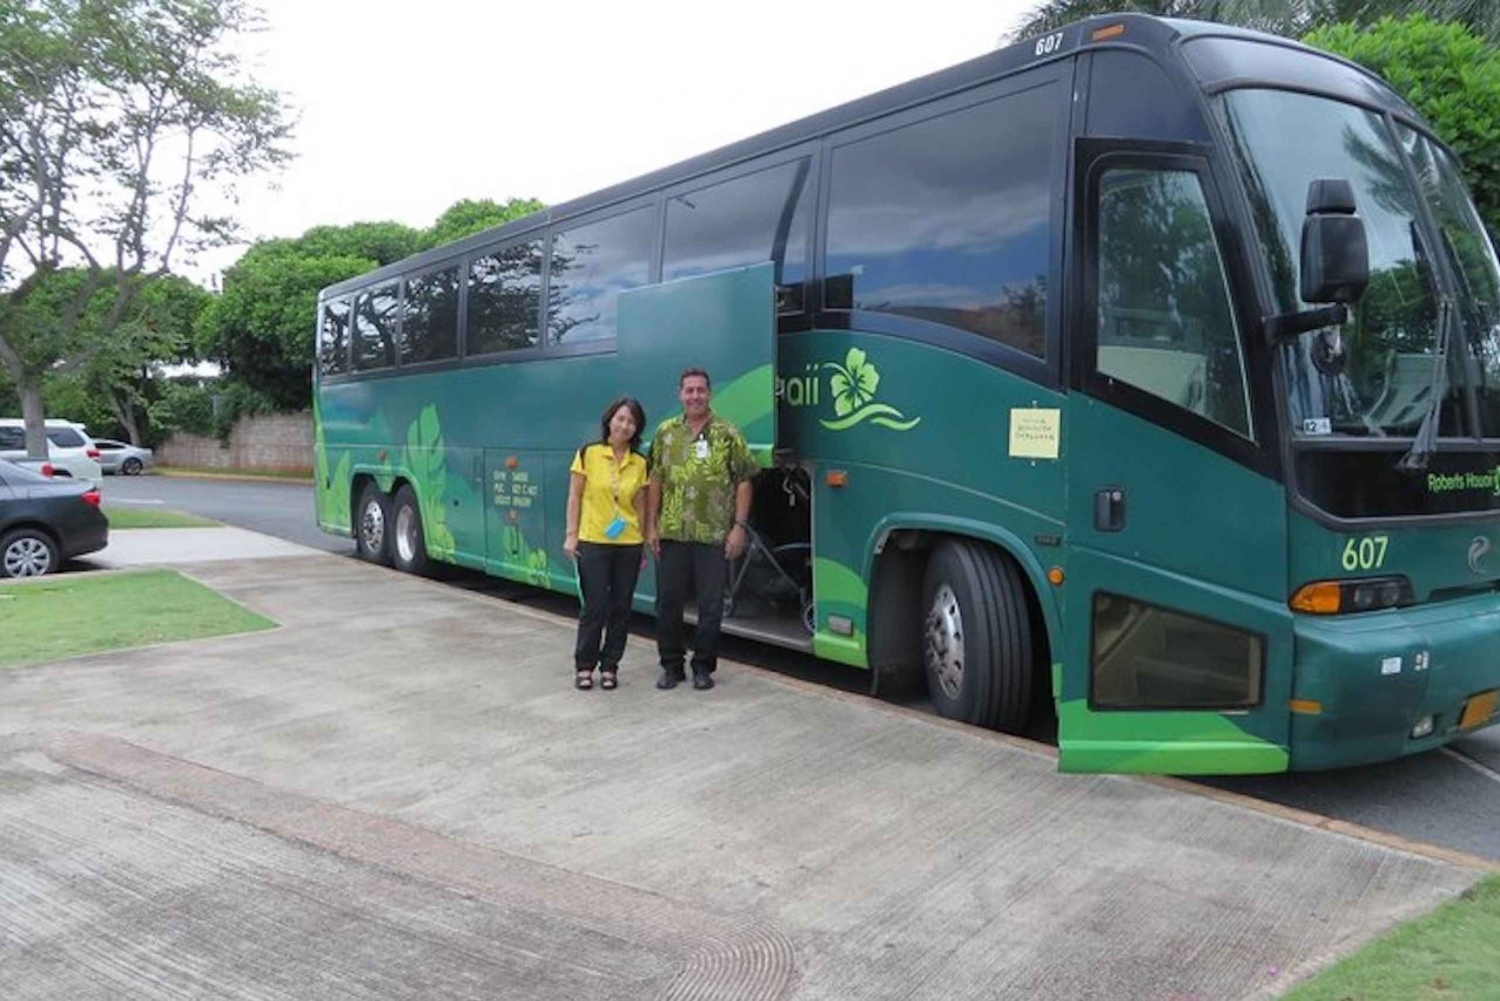 From Waikiki: Waikele Premium Outlets Roundtrip Bus Transfer